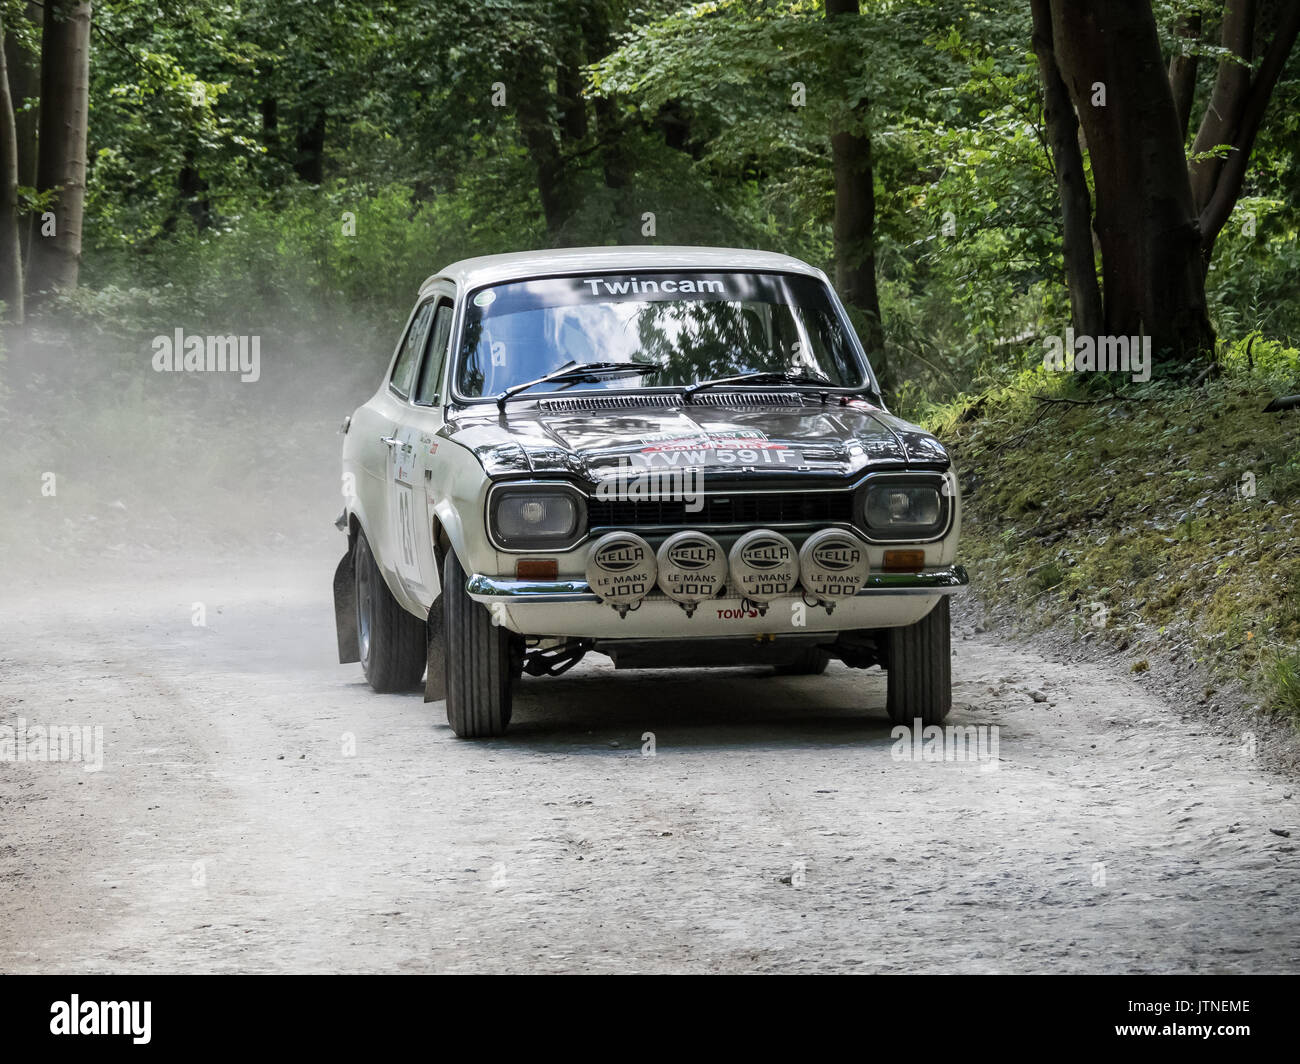 Ford Escort mk1 rally car at Goodwood Festival of Speed Stock Photo